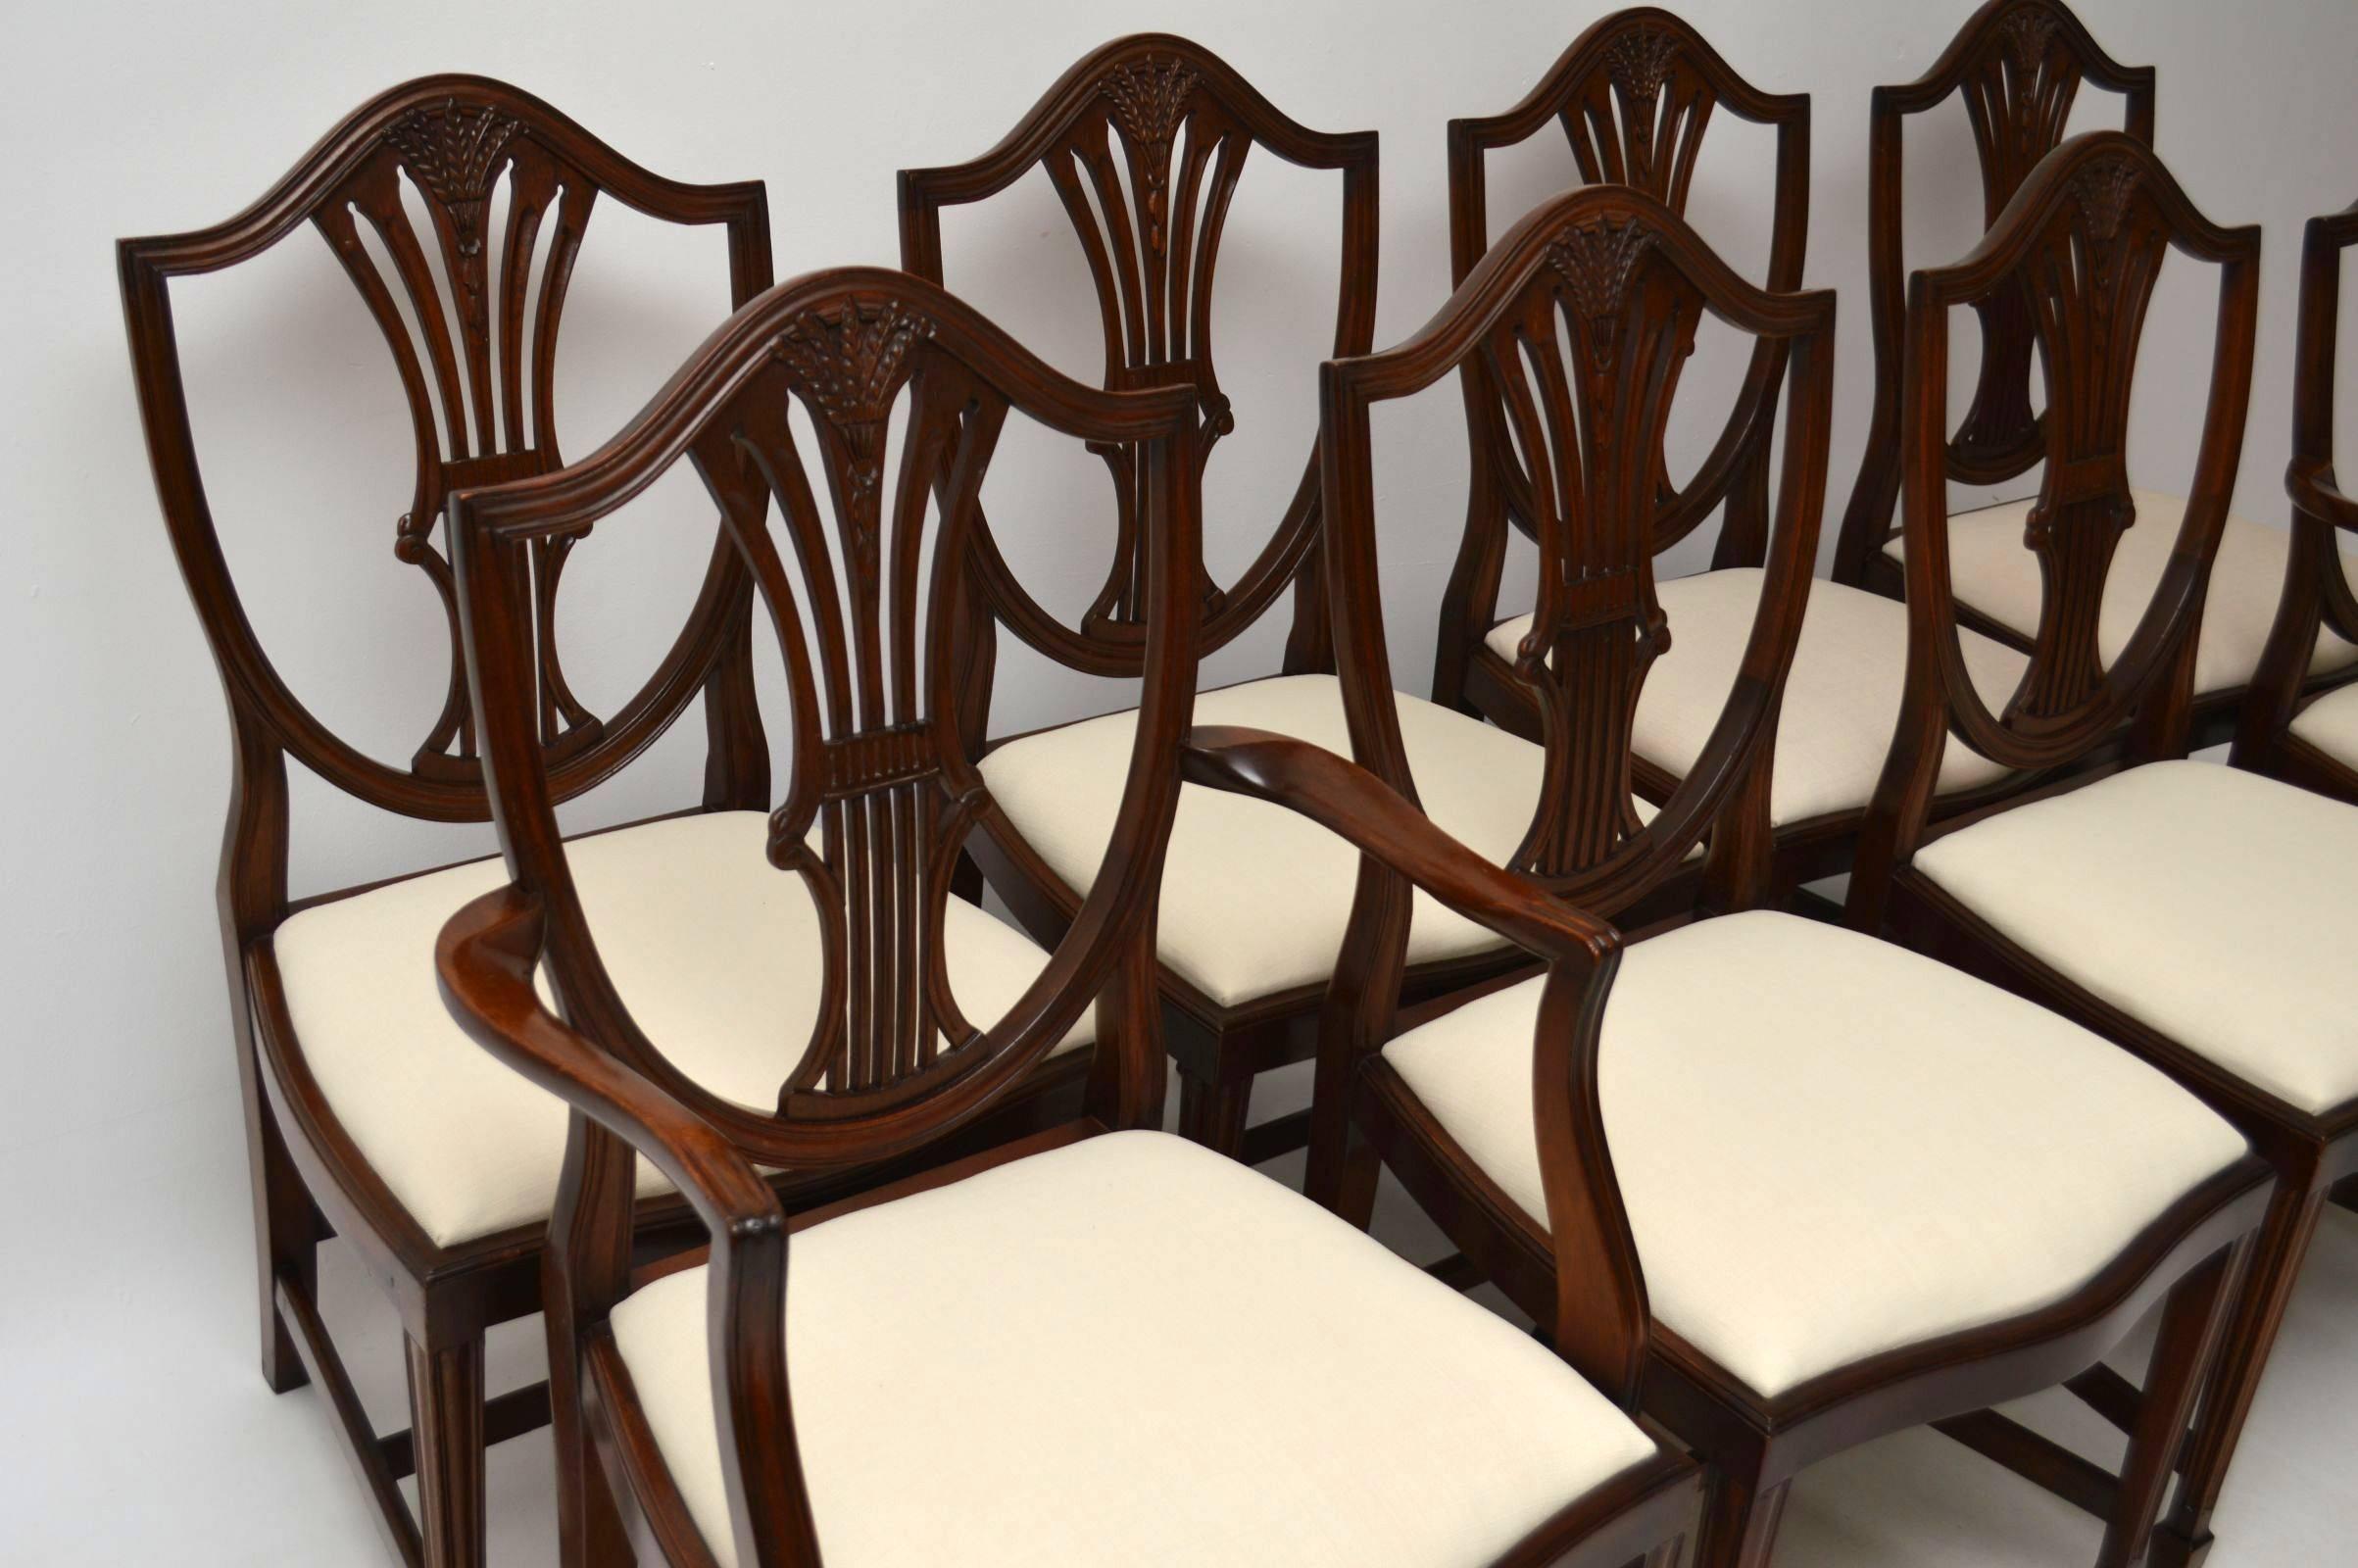 Set of eight mahogany dining chairs including two carvers, in good condition with newly upholstered drop in seats. These chairs are antique Georgian style and date from circa 1950s period. They have shield backs with wheat sheaf and other carvings.